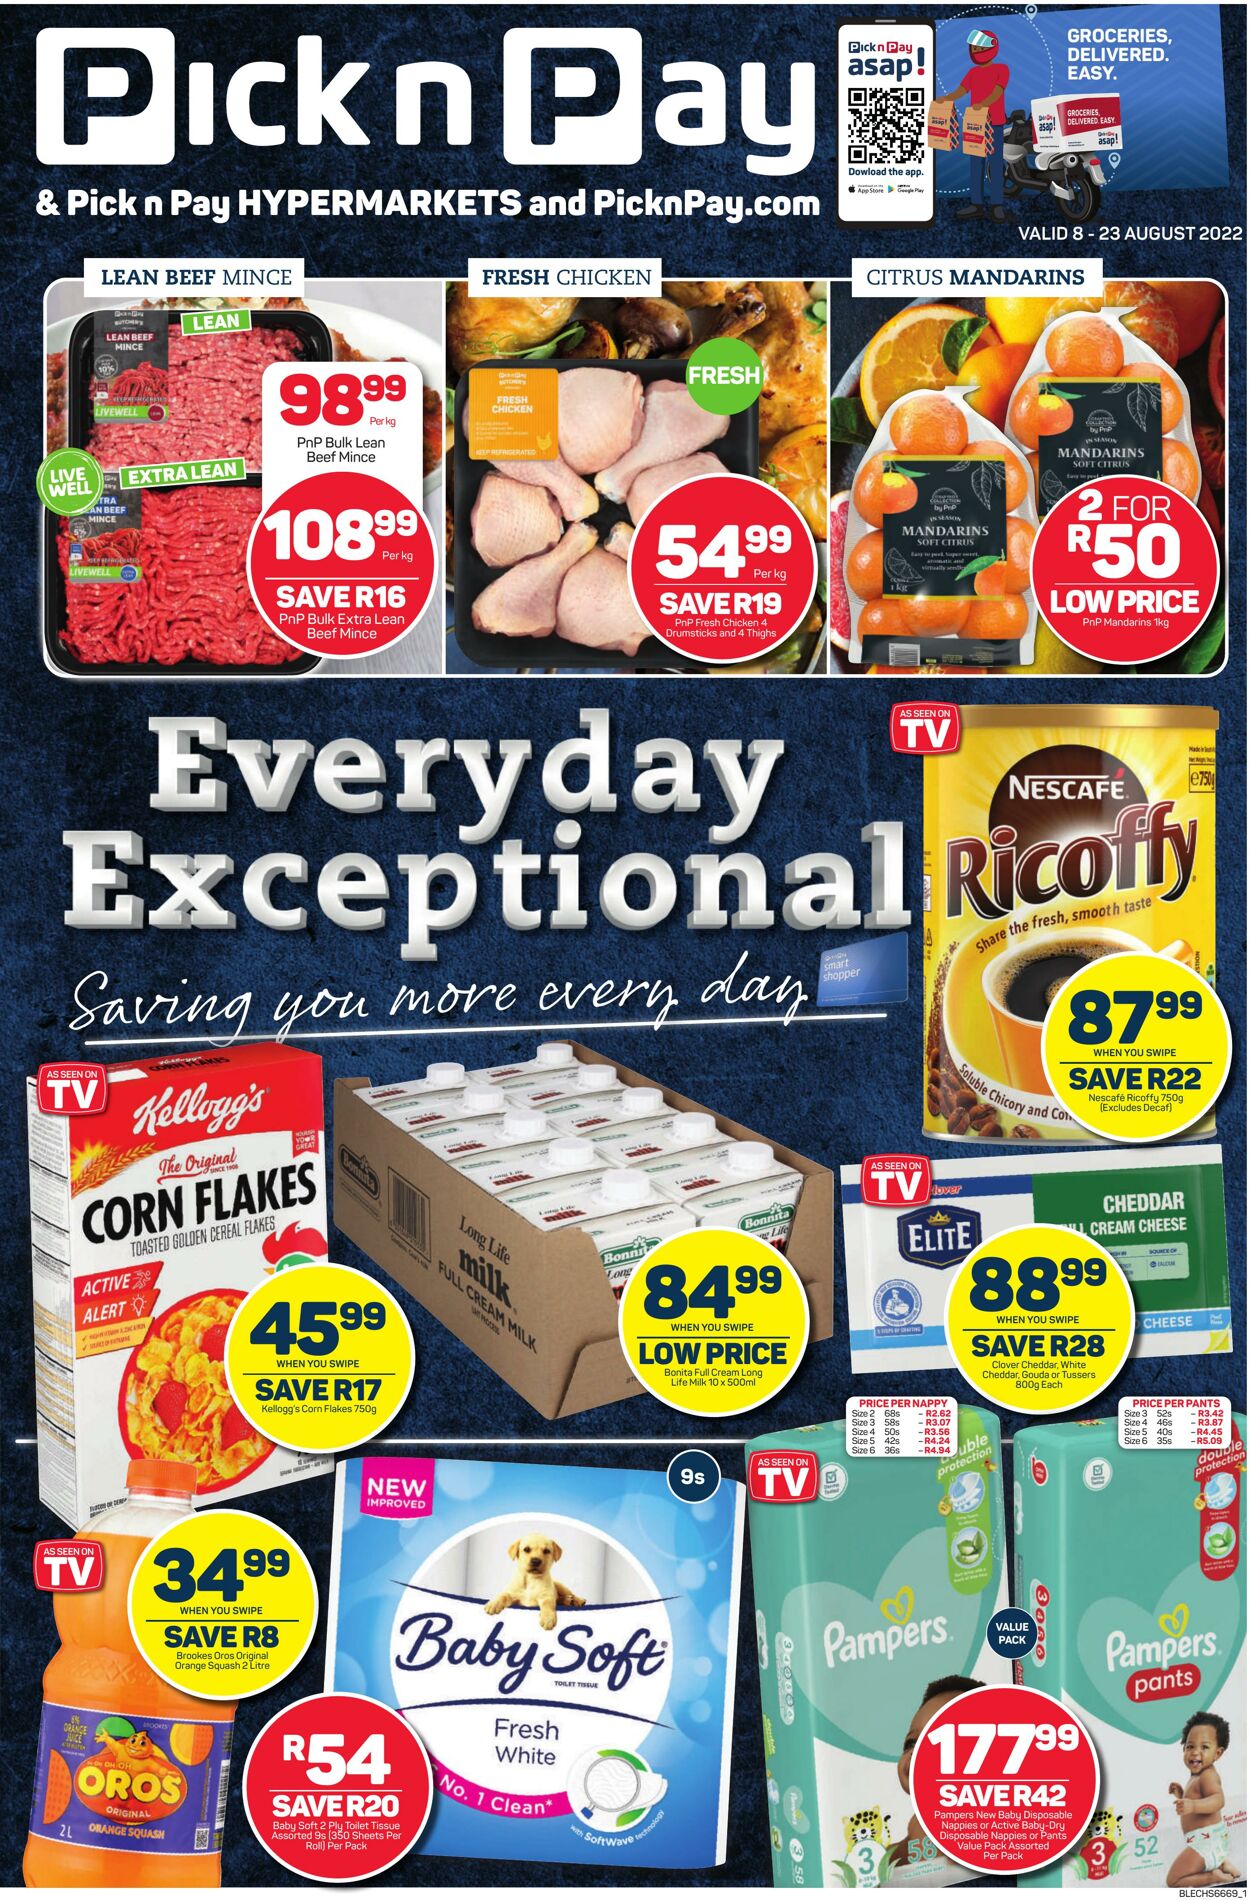 Special Pick n Pay 08.08.2022-23.08.2022